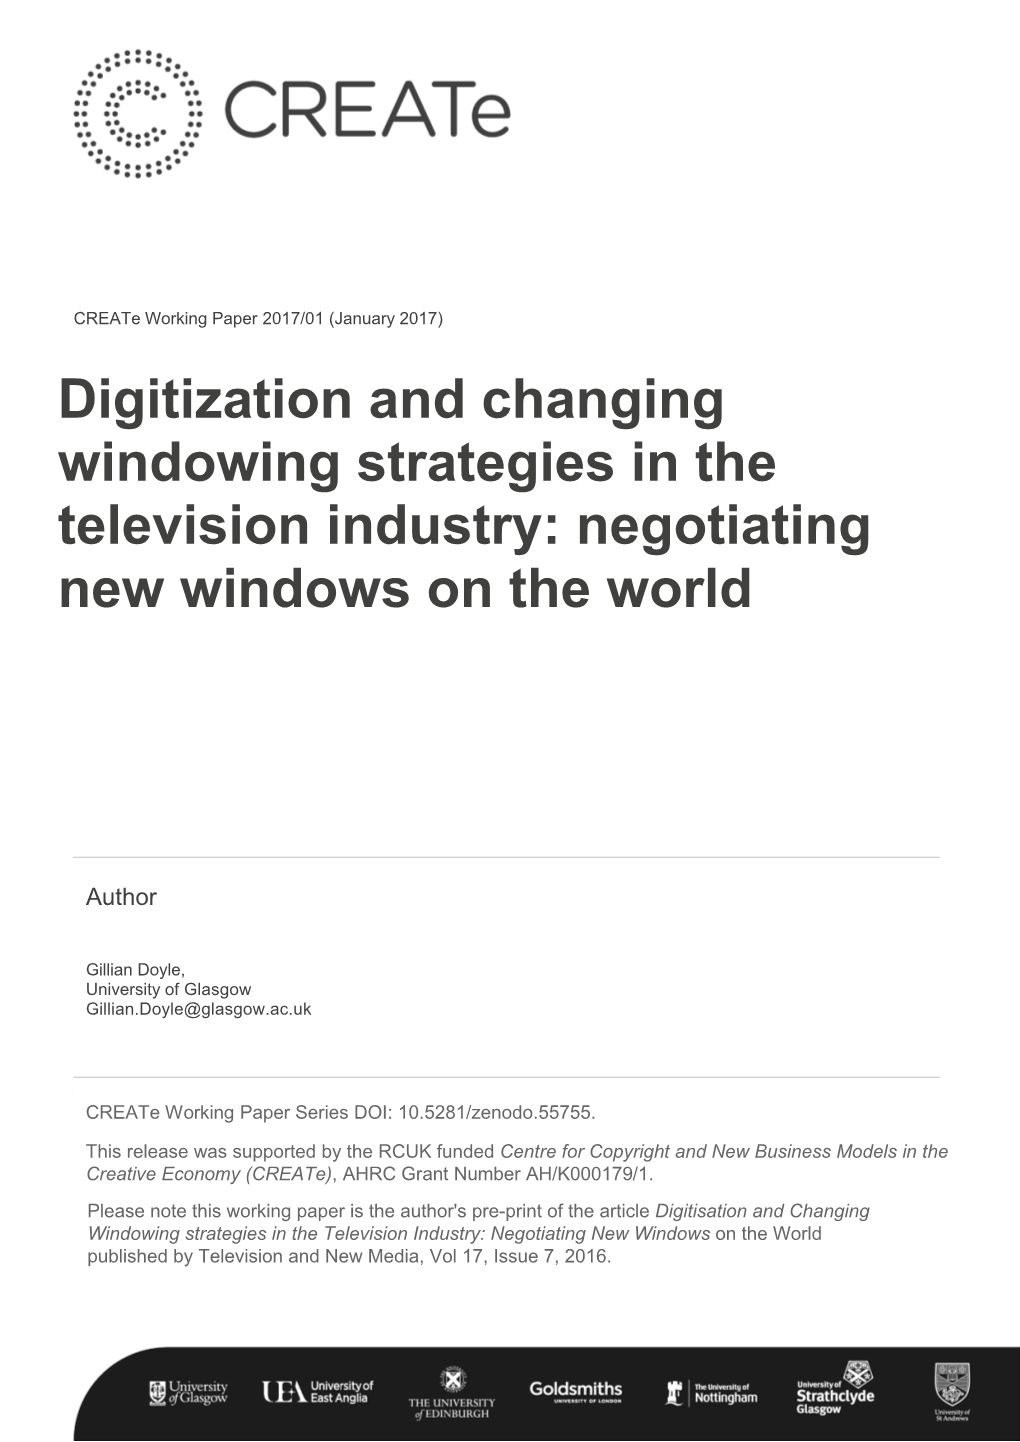 Digitization and Changing Windowing Strategies in the Television Industry: Negotiating New Windows on the World